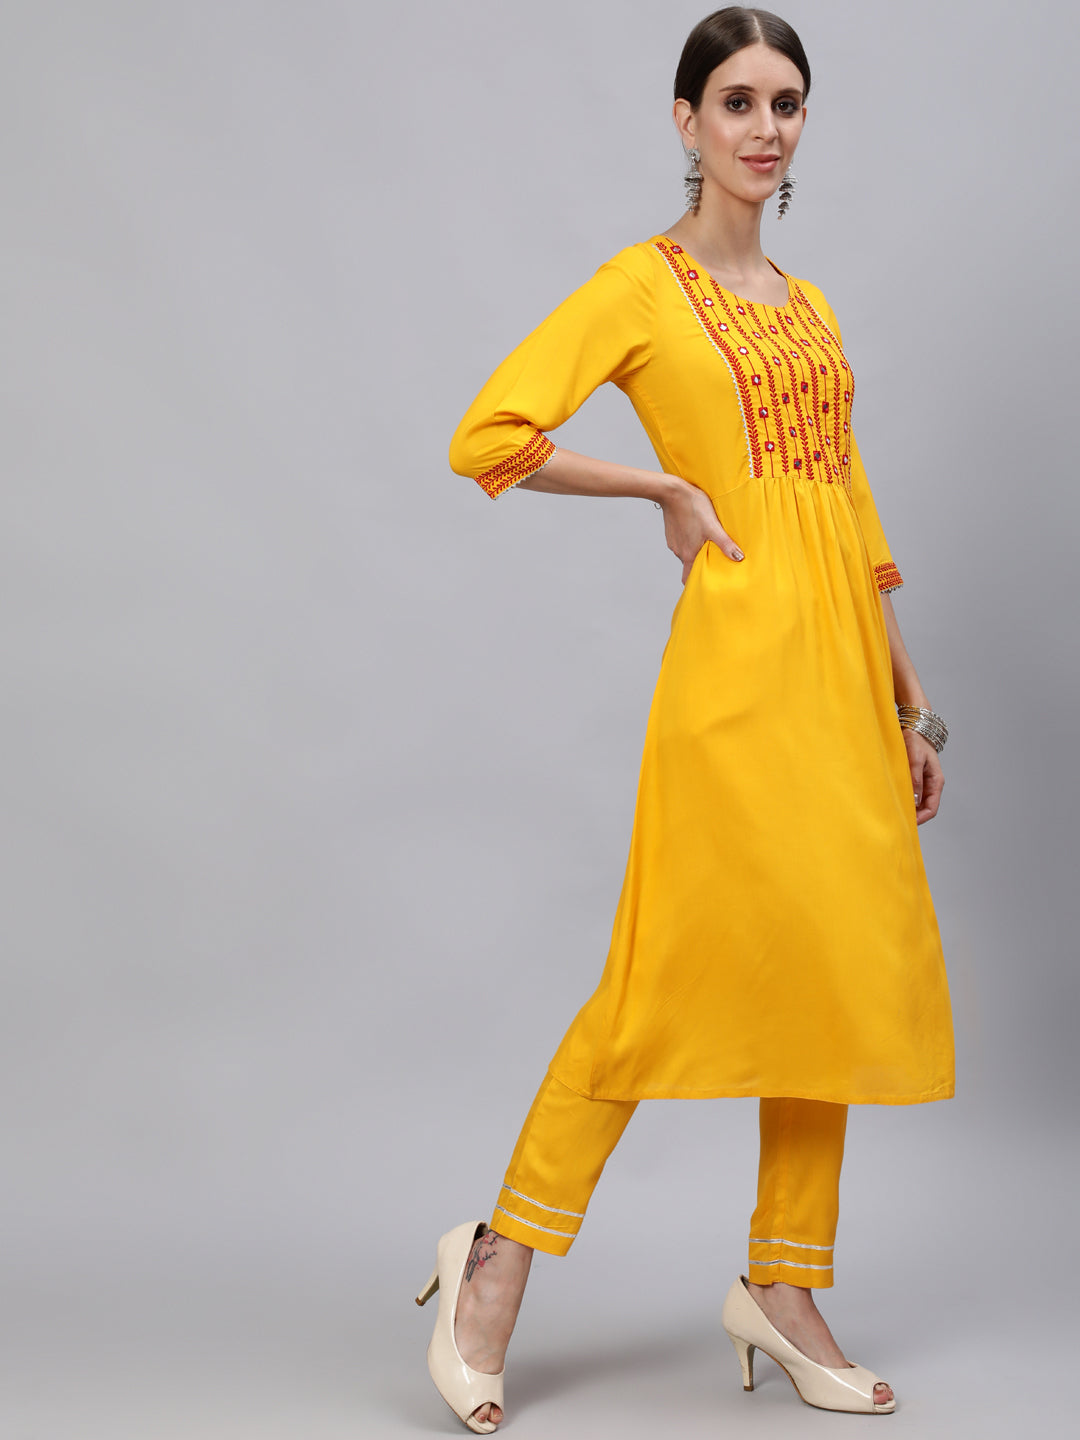 Buy ANCHOR GIRL DESIGNER NAVY BLUE KURTI and YELLOW COLOR LEGGING at  Amazon.in